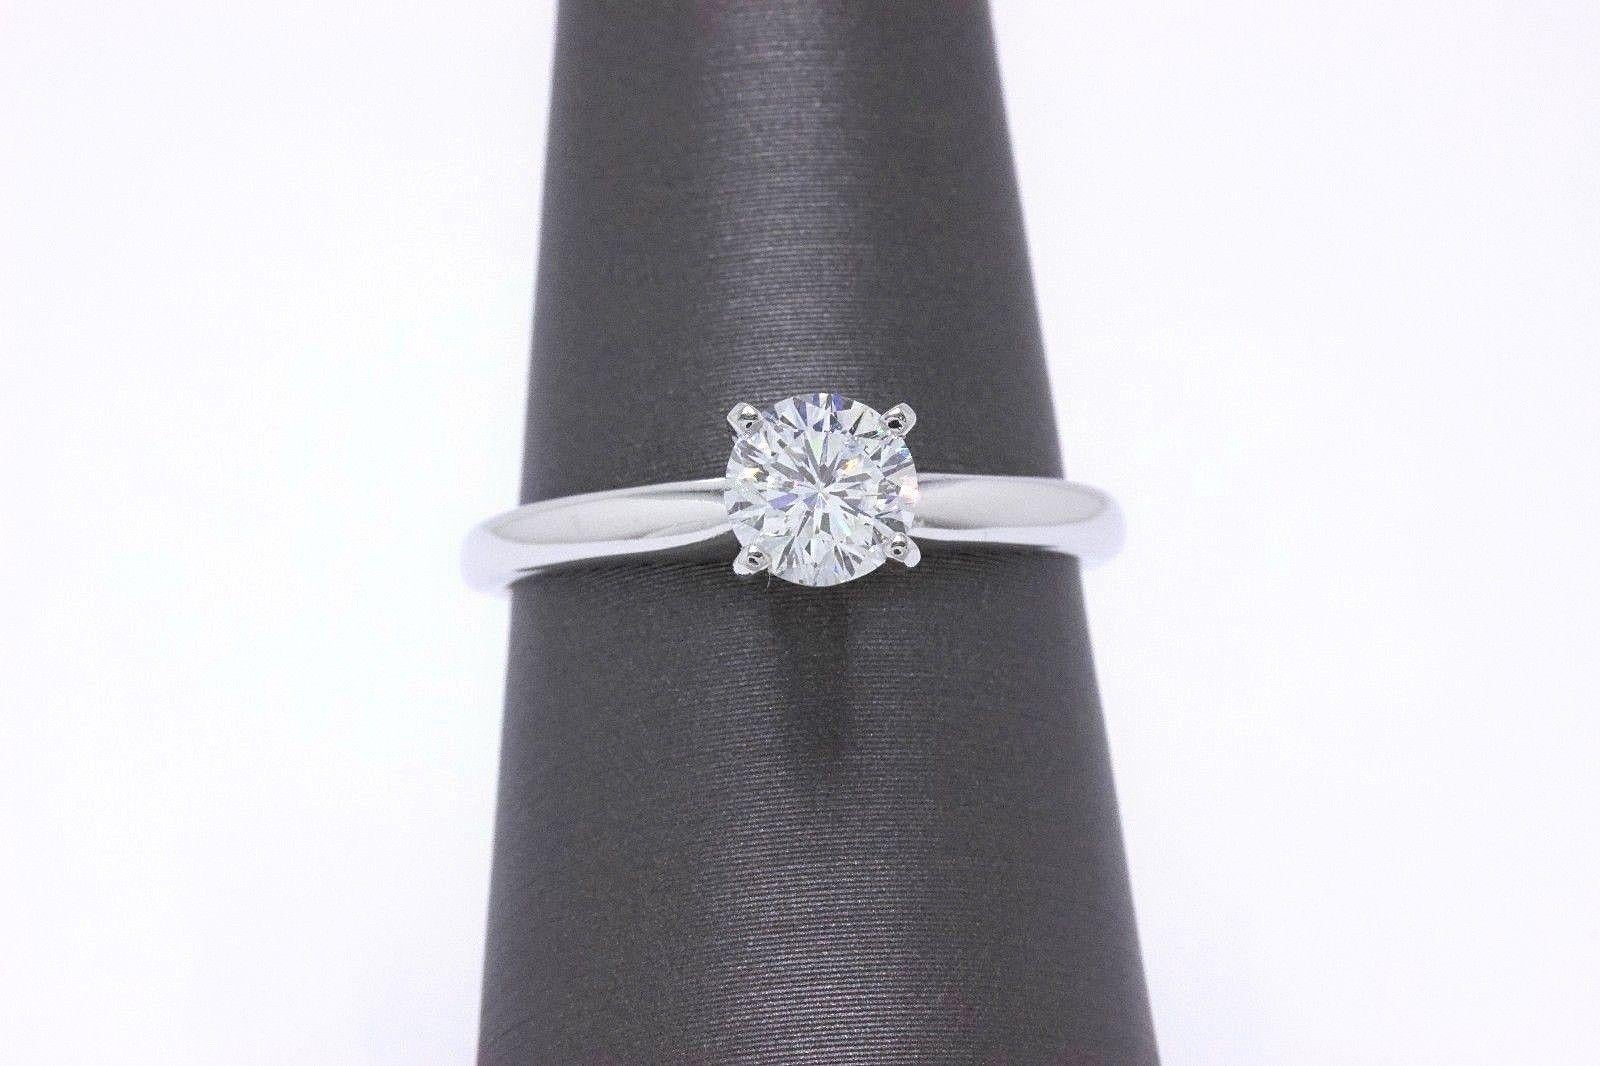 THE LEO DIAMOND SOLITAIRE ENGAGEMENT RING
Style:  4 - Prong Solitaire
Serial Number:  LEO266755
Certificate:  IGI # 6431100115
Metal: 14KT White Gold
Size:  6.75 - Sizable 
Total Carat Weight:  0.69 CTS
Diamond Shape:  Leo Round
Diamond Color &